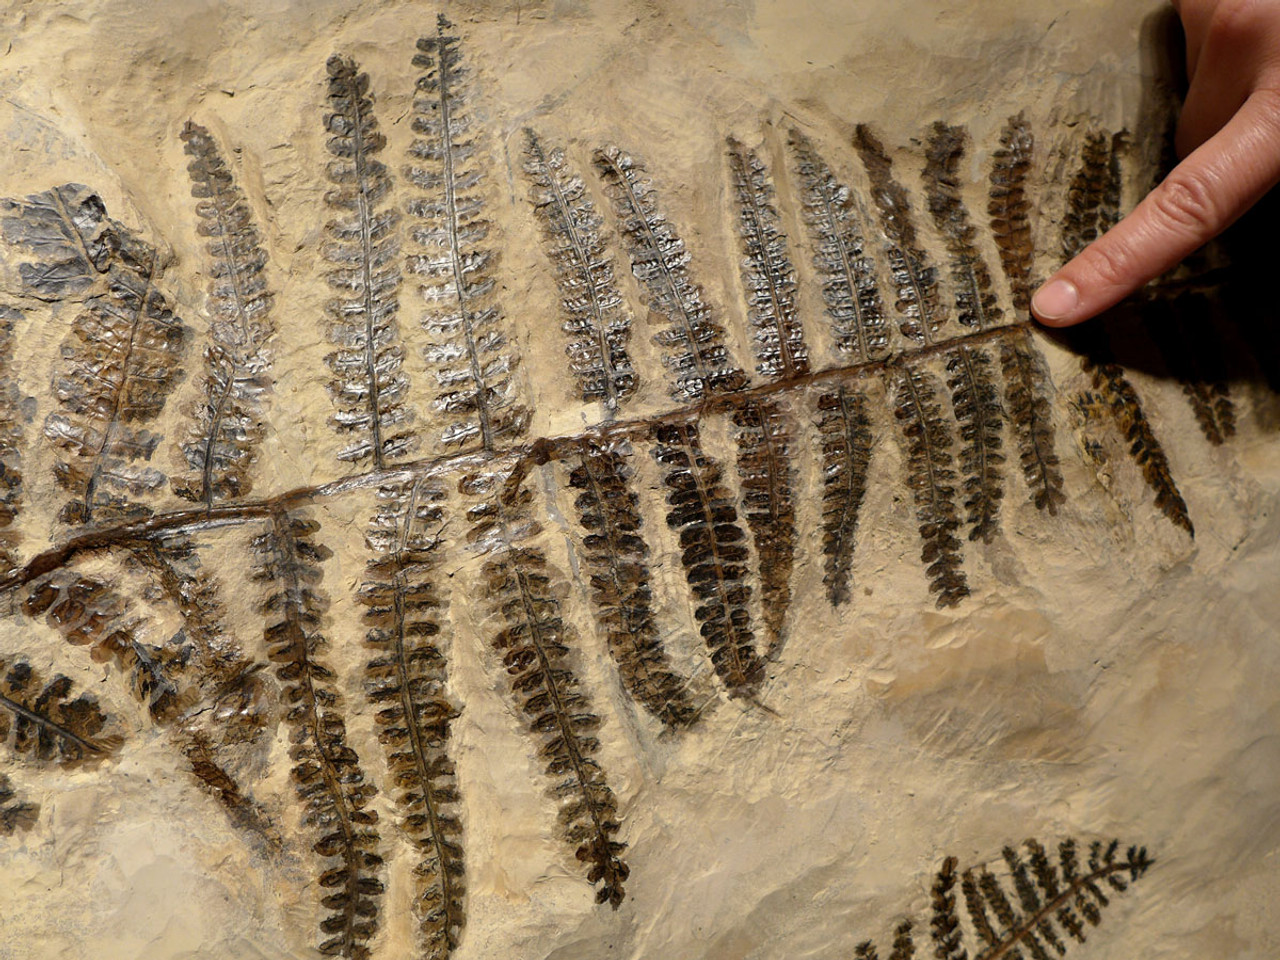 MASSIVE PREHISTORIC PERMIAN AUTUNIA CALLIPTERIS FOSSIL FERN PLANT FROM BEFORE THE DINOSAURS  *PLX002